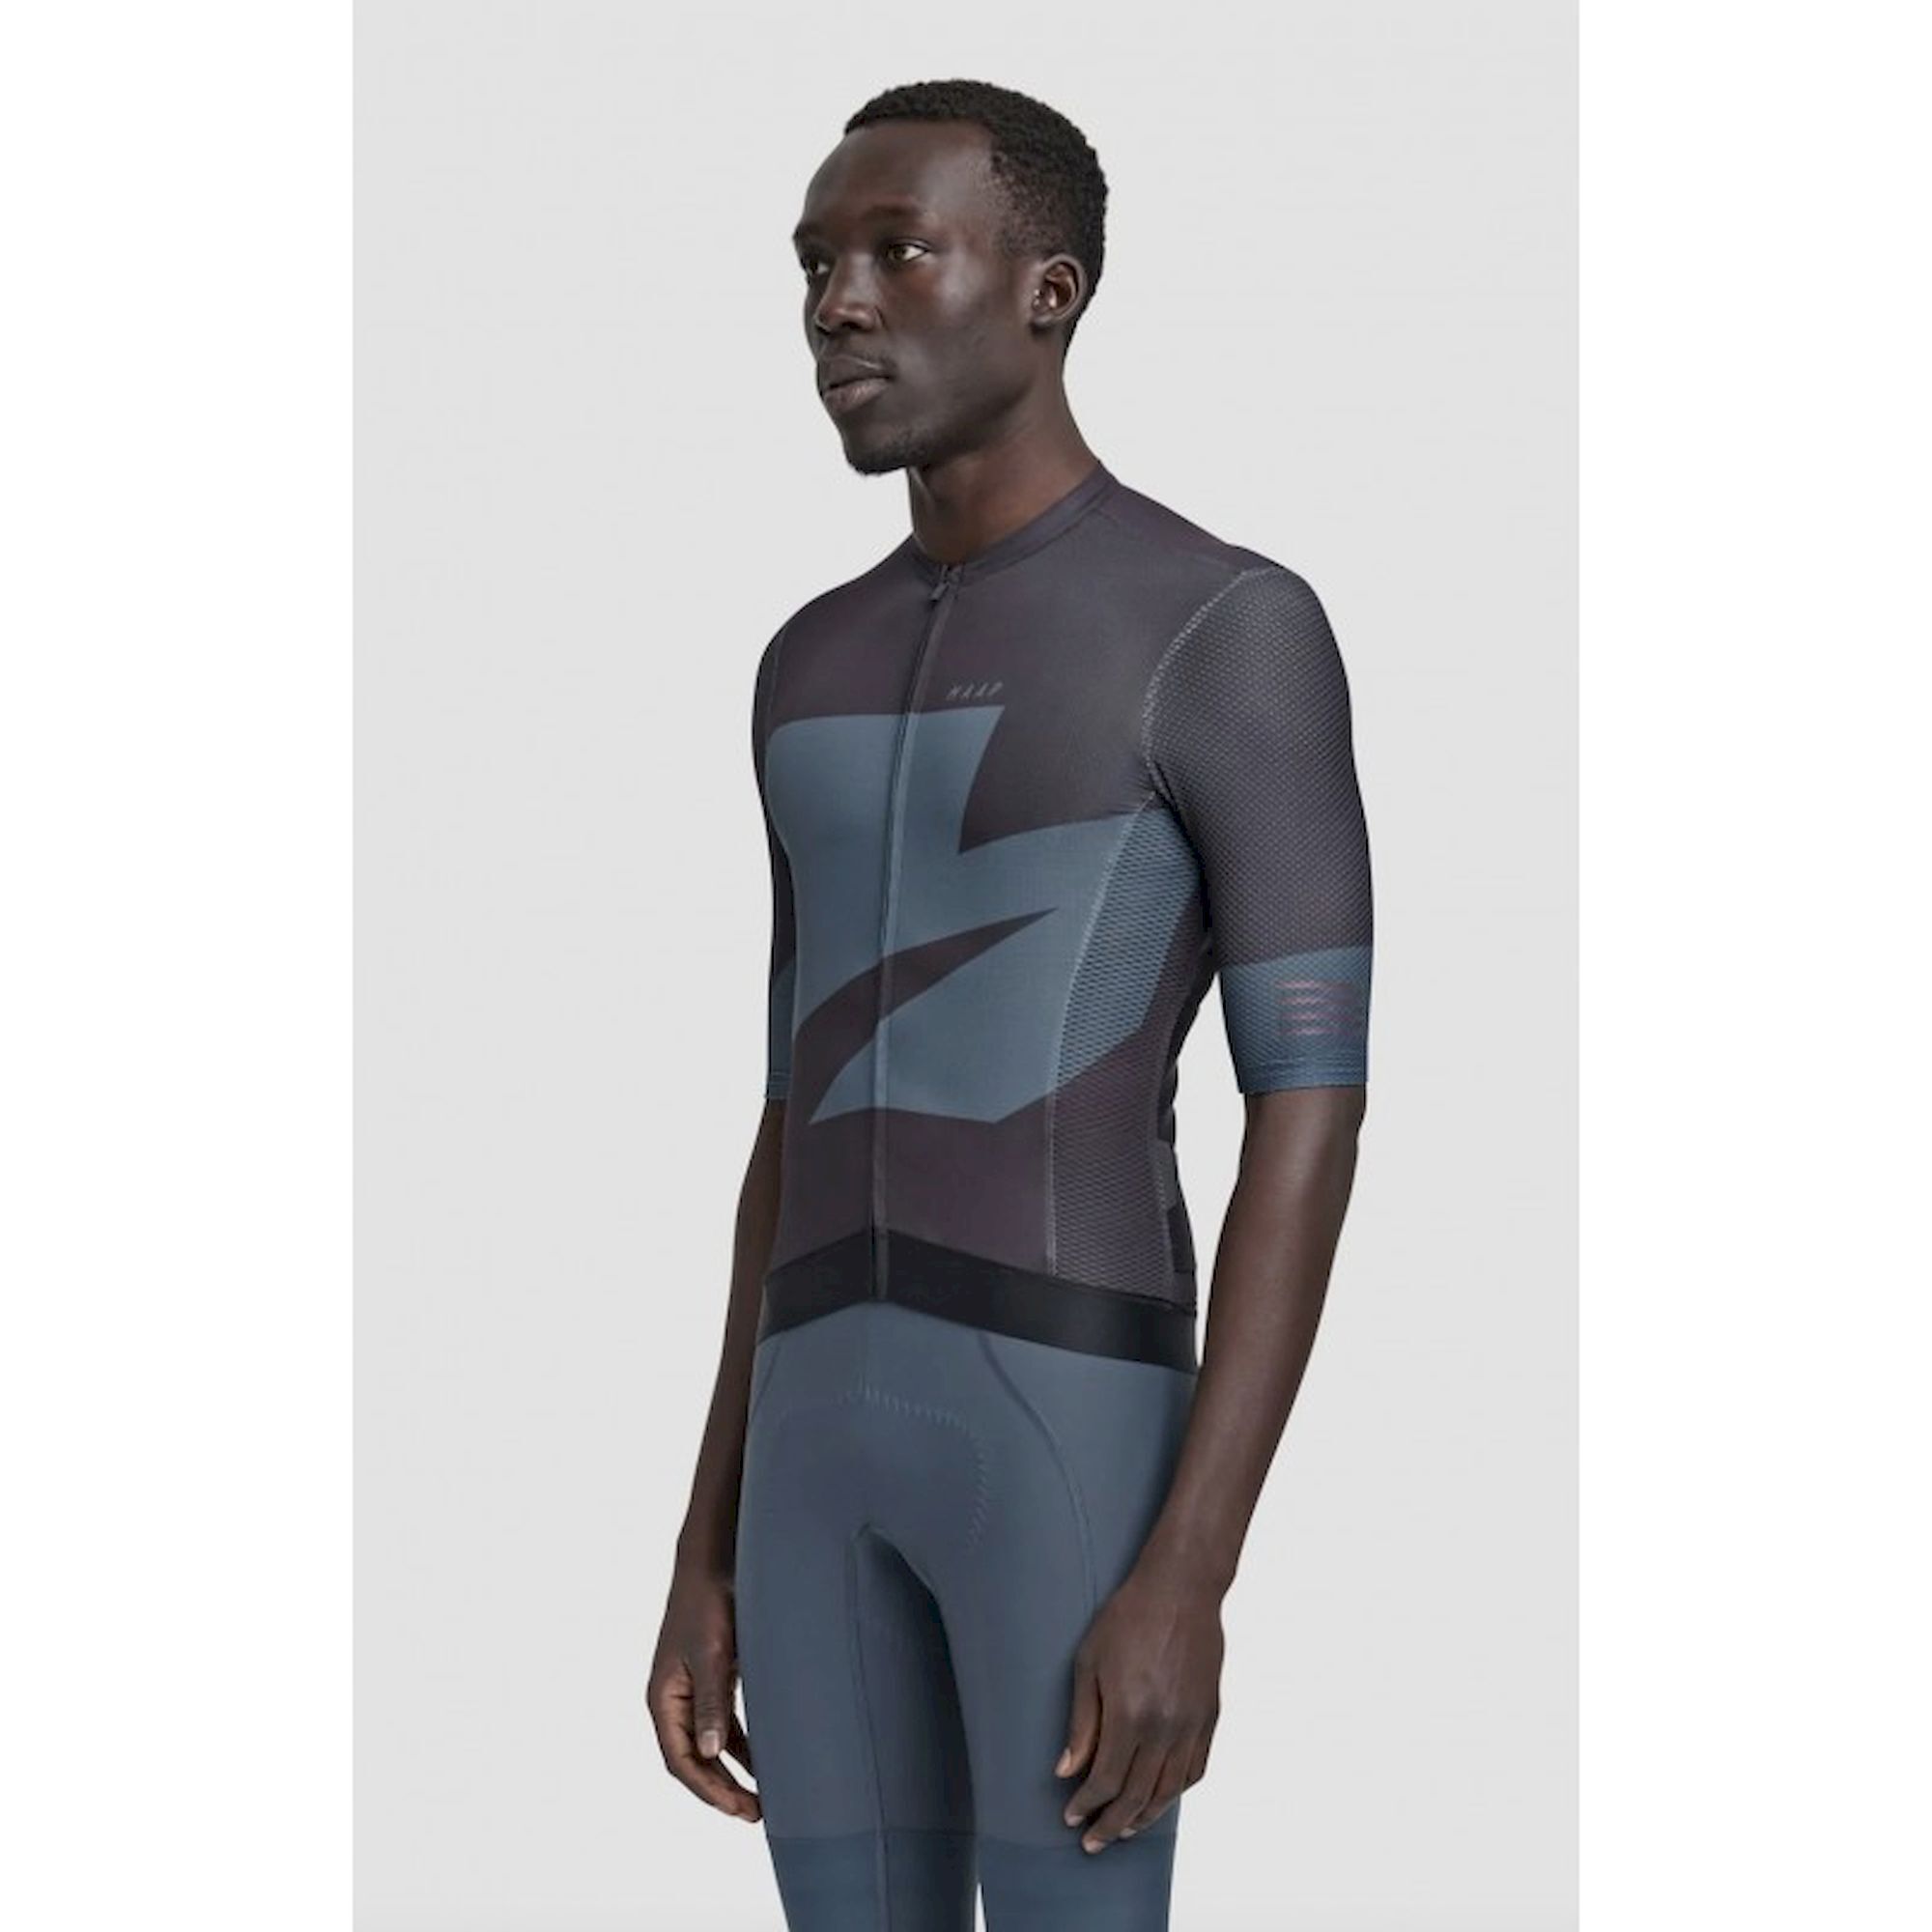 Maap Evolve Pro Air Jersey - Maillot ciclismo - Hombre | Hardloop